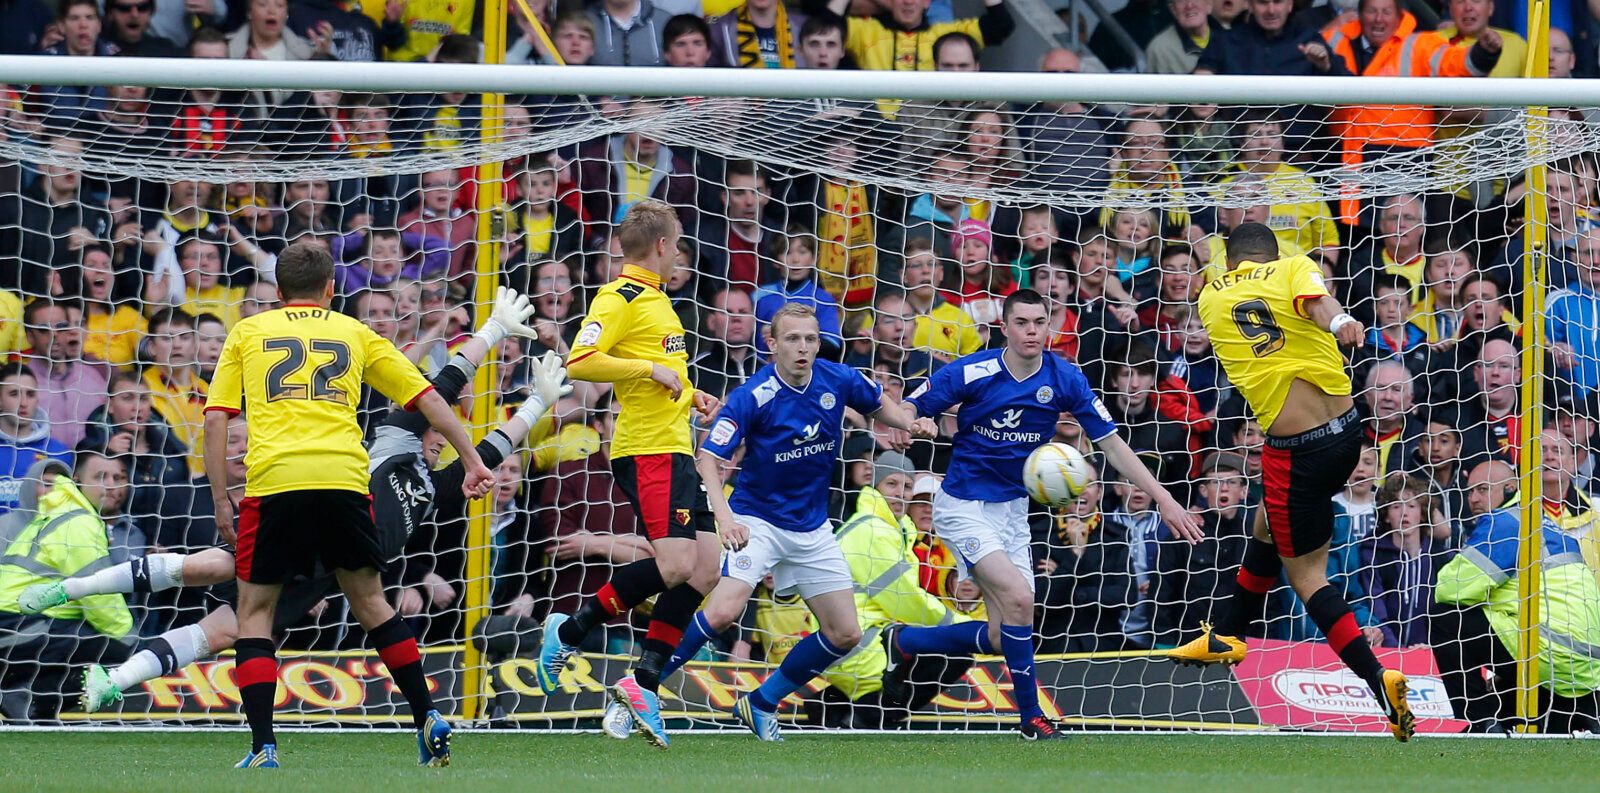 Football - Watford v Leicester City - npower Football League Championship Play-Off Semi Final Second Leg - Vicarage Road - 12/5/13 
Watford's Troy Deeney (R) scoring their third goal  
Mandatory Credit: Action Images / Andrew Couldridge 
Livepic 
EDITORIAL USE ONLY. No use with unauthorized audio, video, data, fixture lists, club/league logos or live services. Online in-match use limited to 45 images, no video emulation. No use in betting, games or single club/league/player publications.  Please